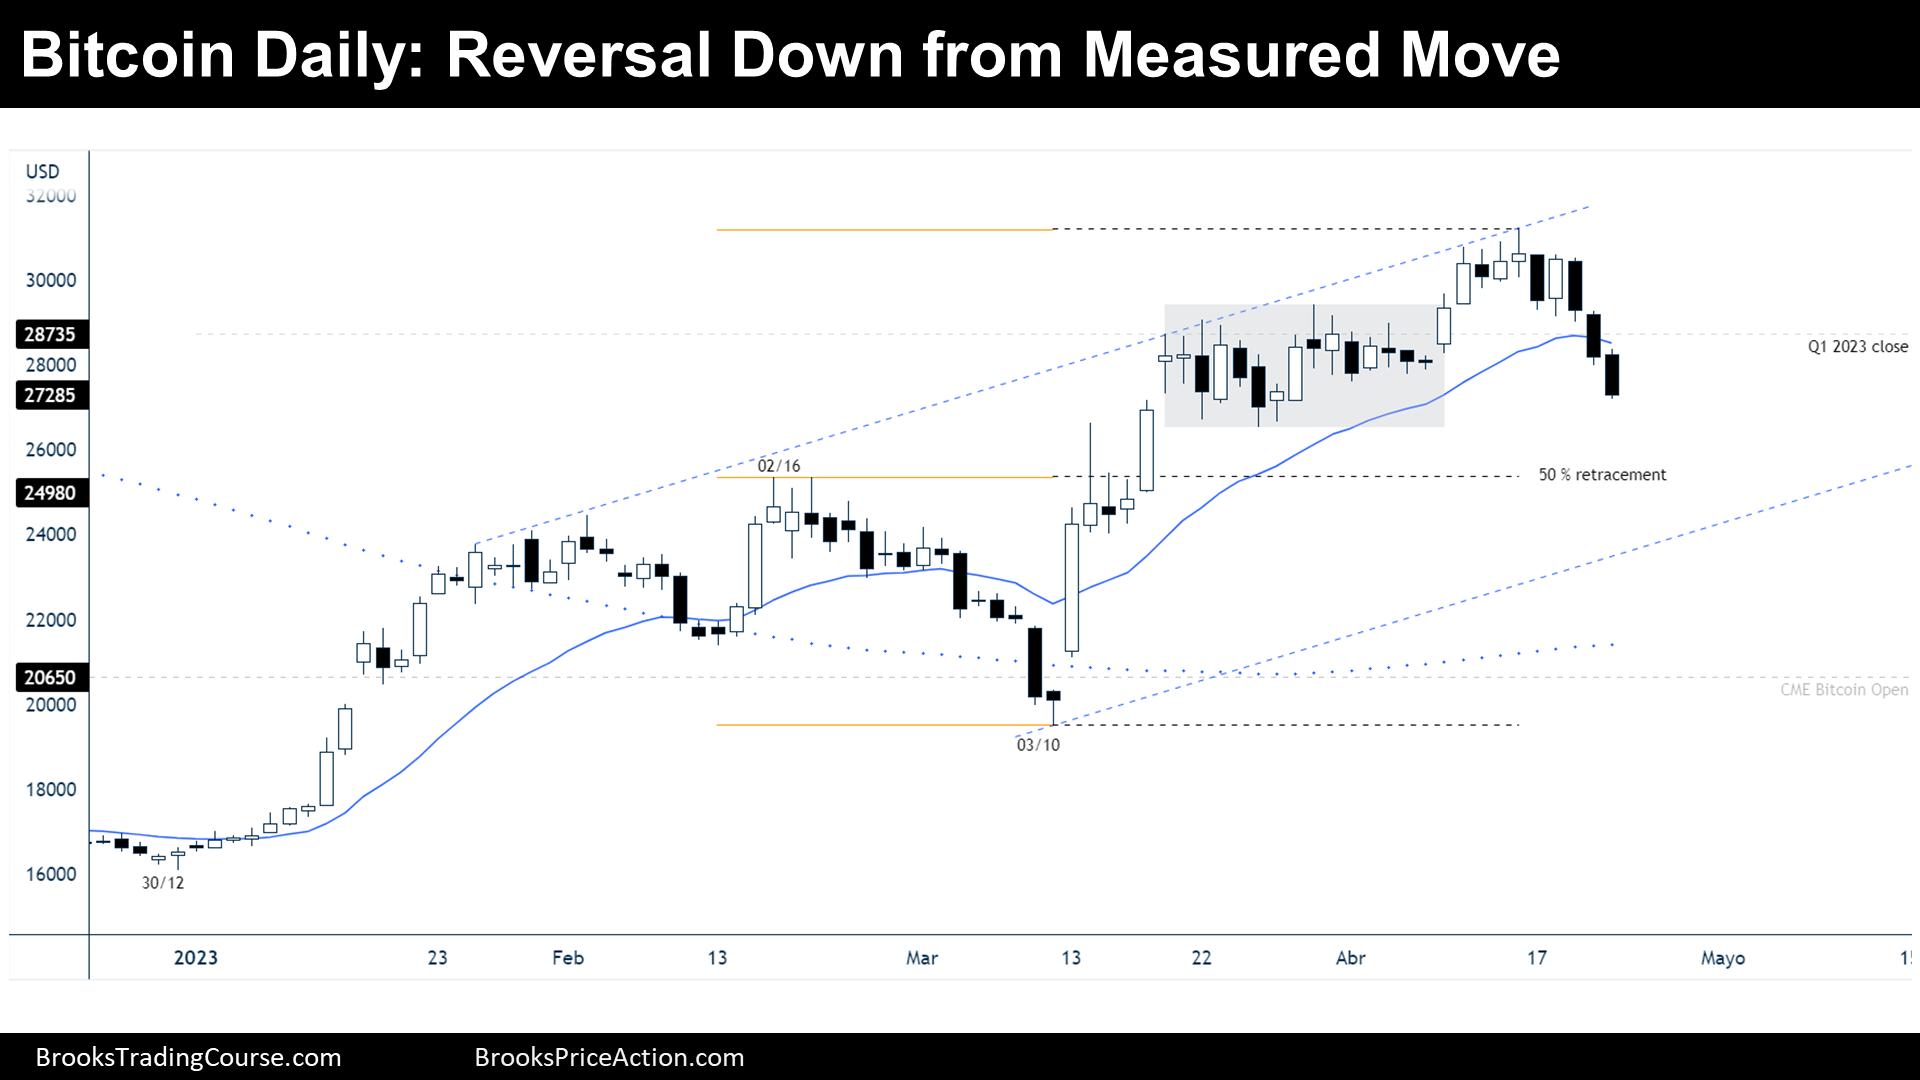 Bitcoin daily chart reversal down from measured move.